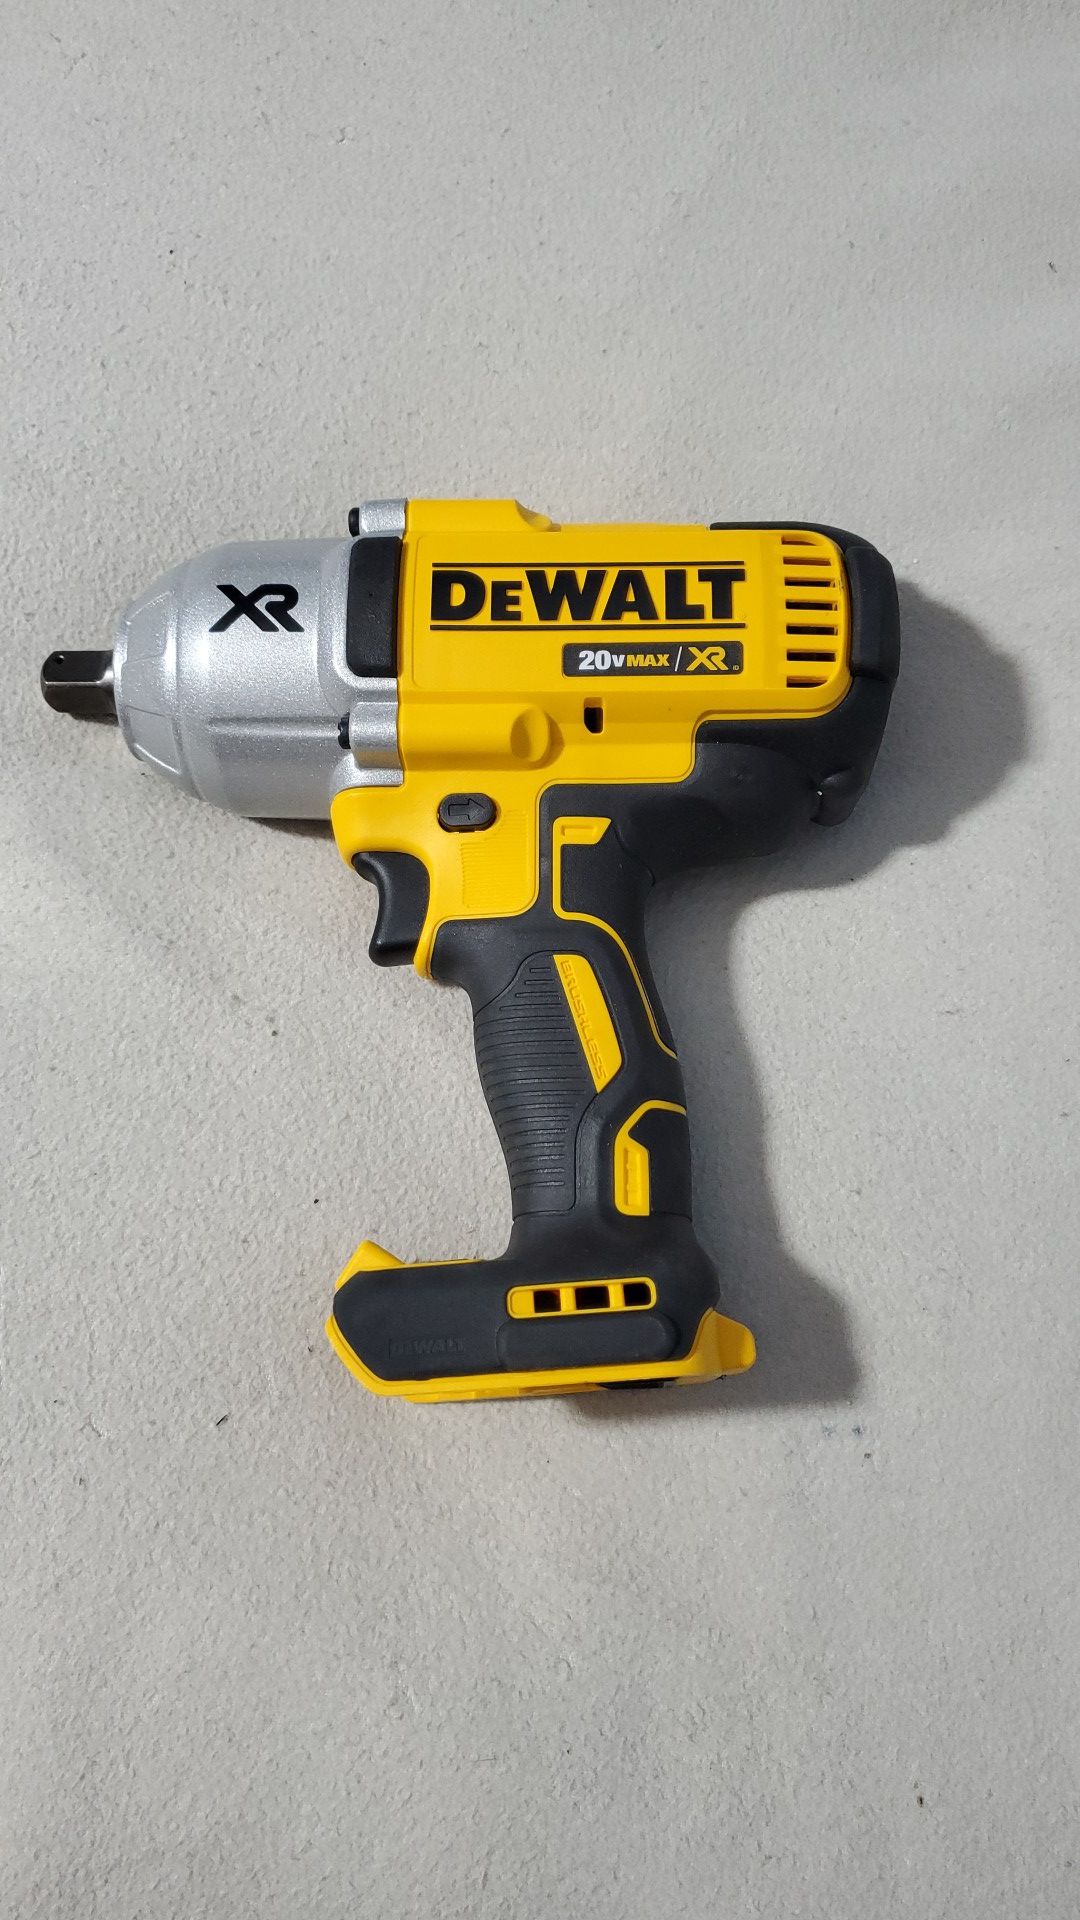 Dewalt 20V Max XR Brushless 1/2in High Torque Impact Wrench. Tool only. Price is firm